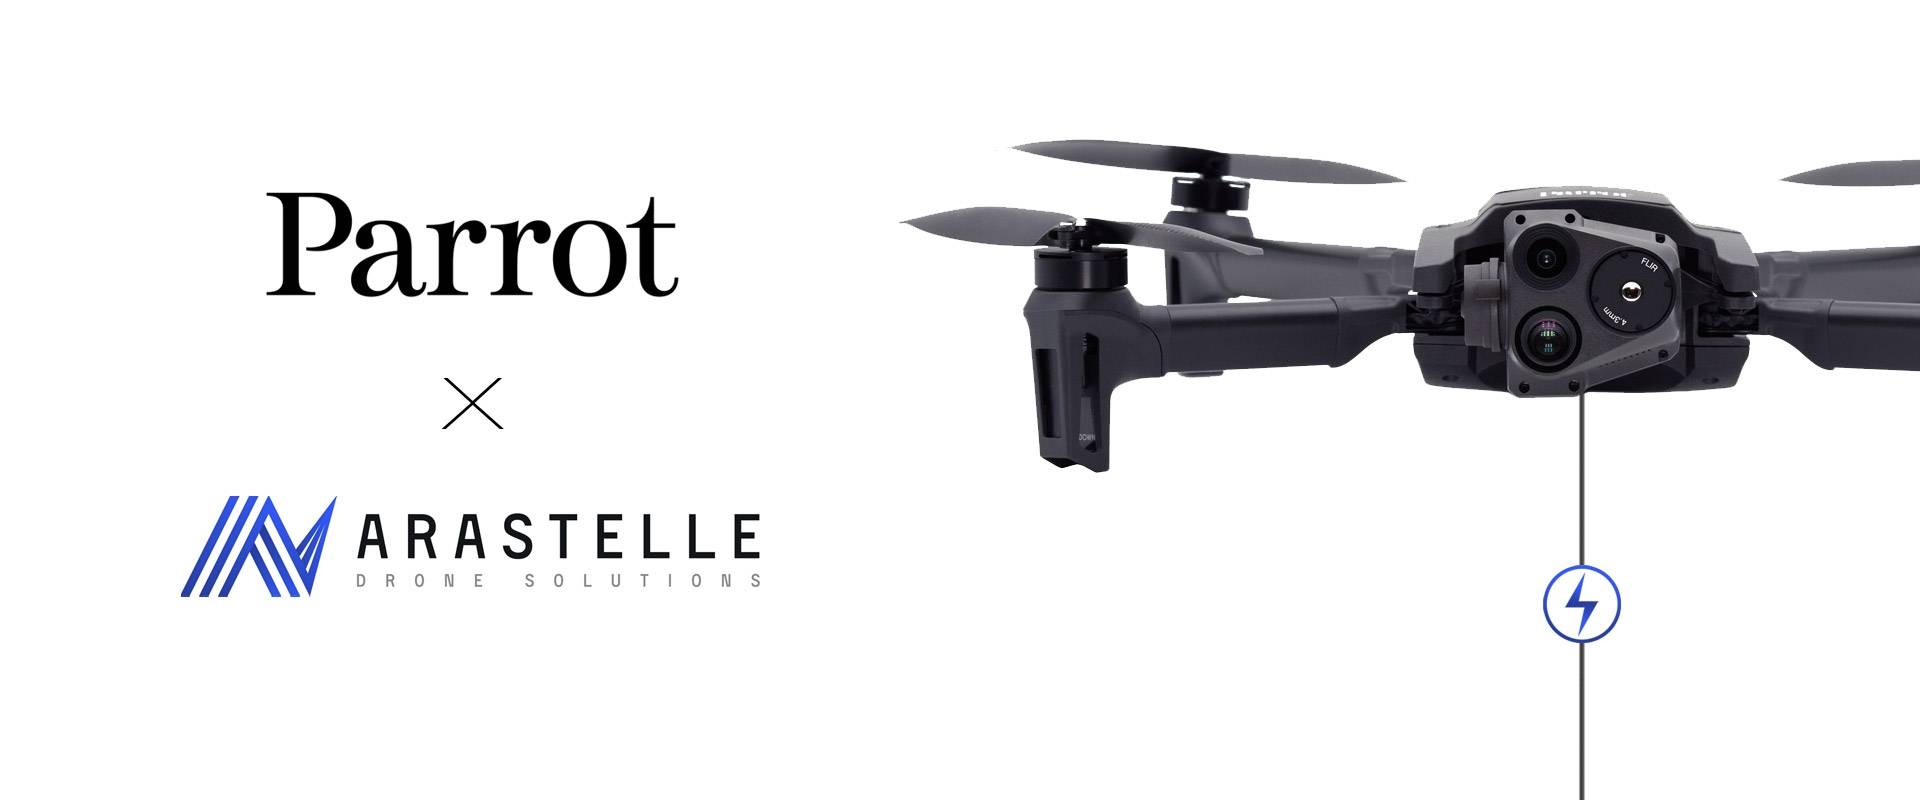 ARASTELLE and PARROT extend the capabilities of the ANAFI USA microdrone with tethered flight